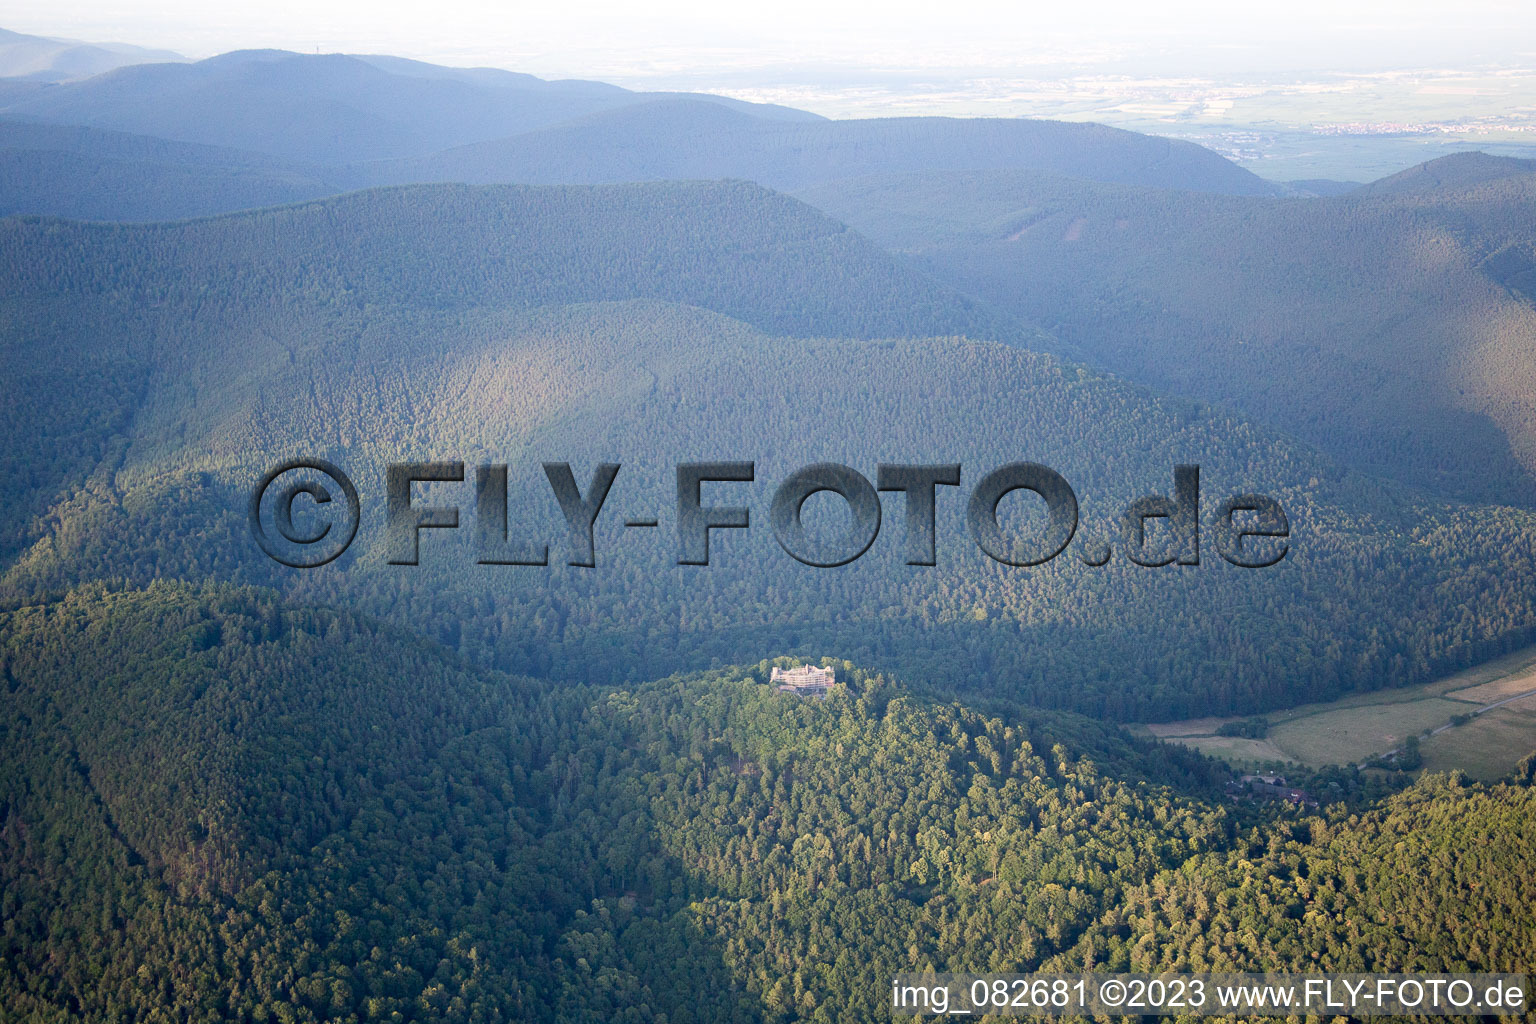 Ramberg in the state Rhineland-Palatinate, Germany from above